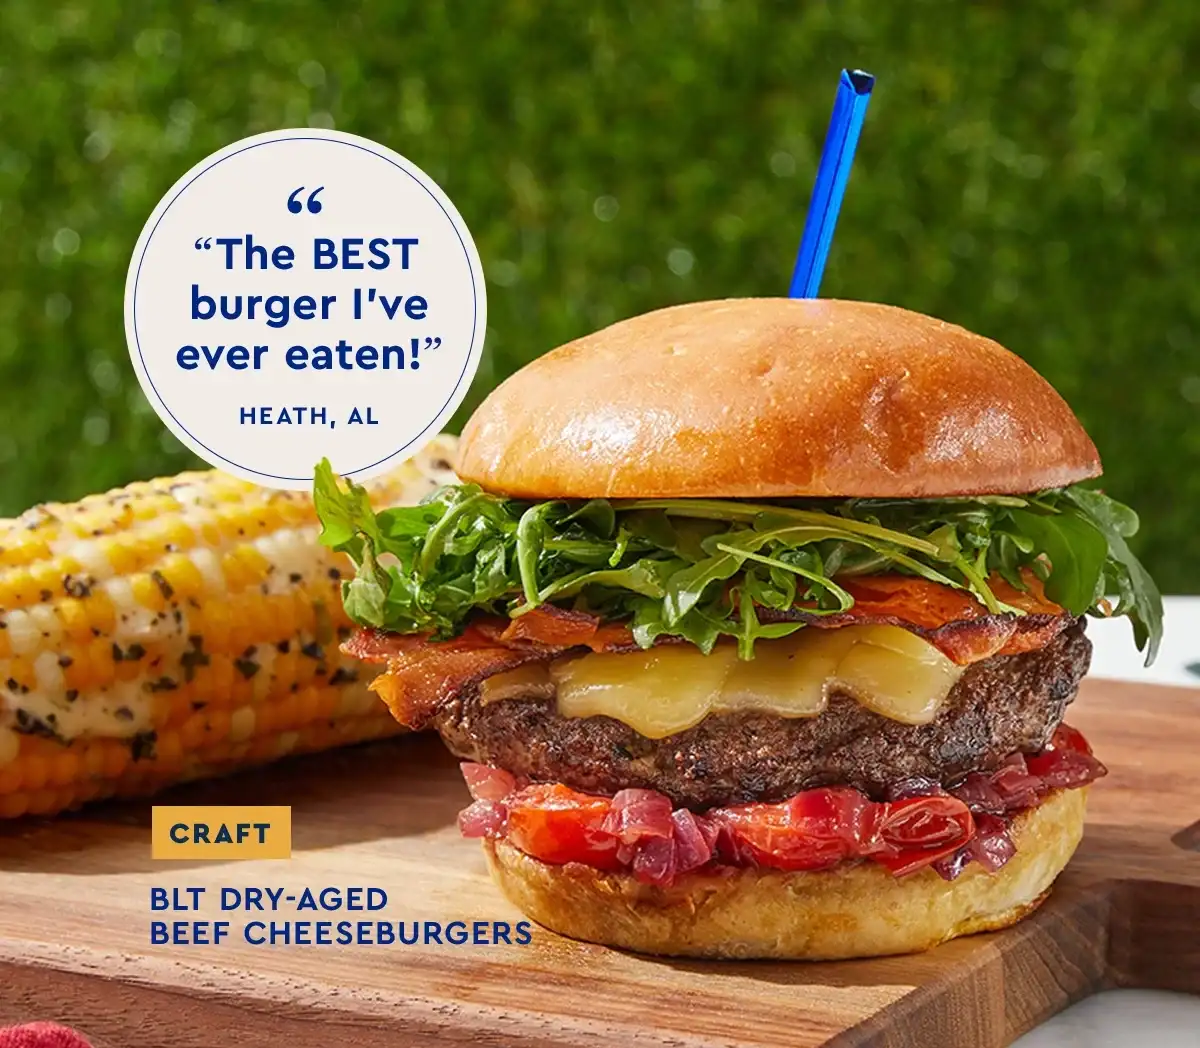 Craft - BLT Dry-Aged Beef Cheeseburgers